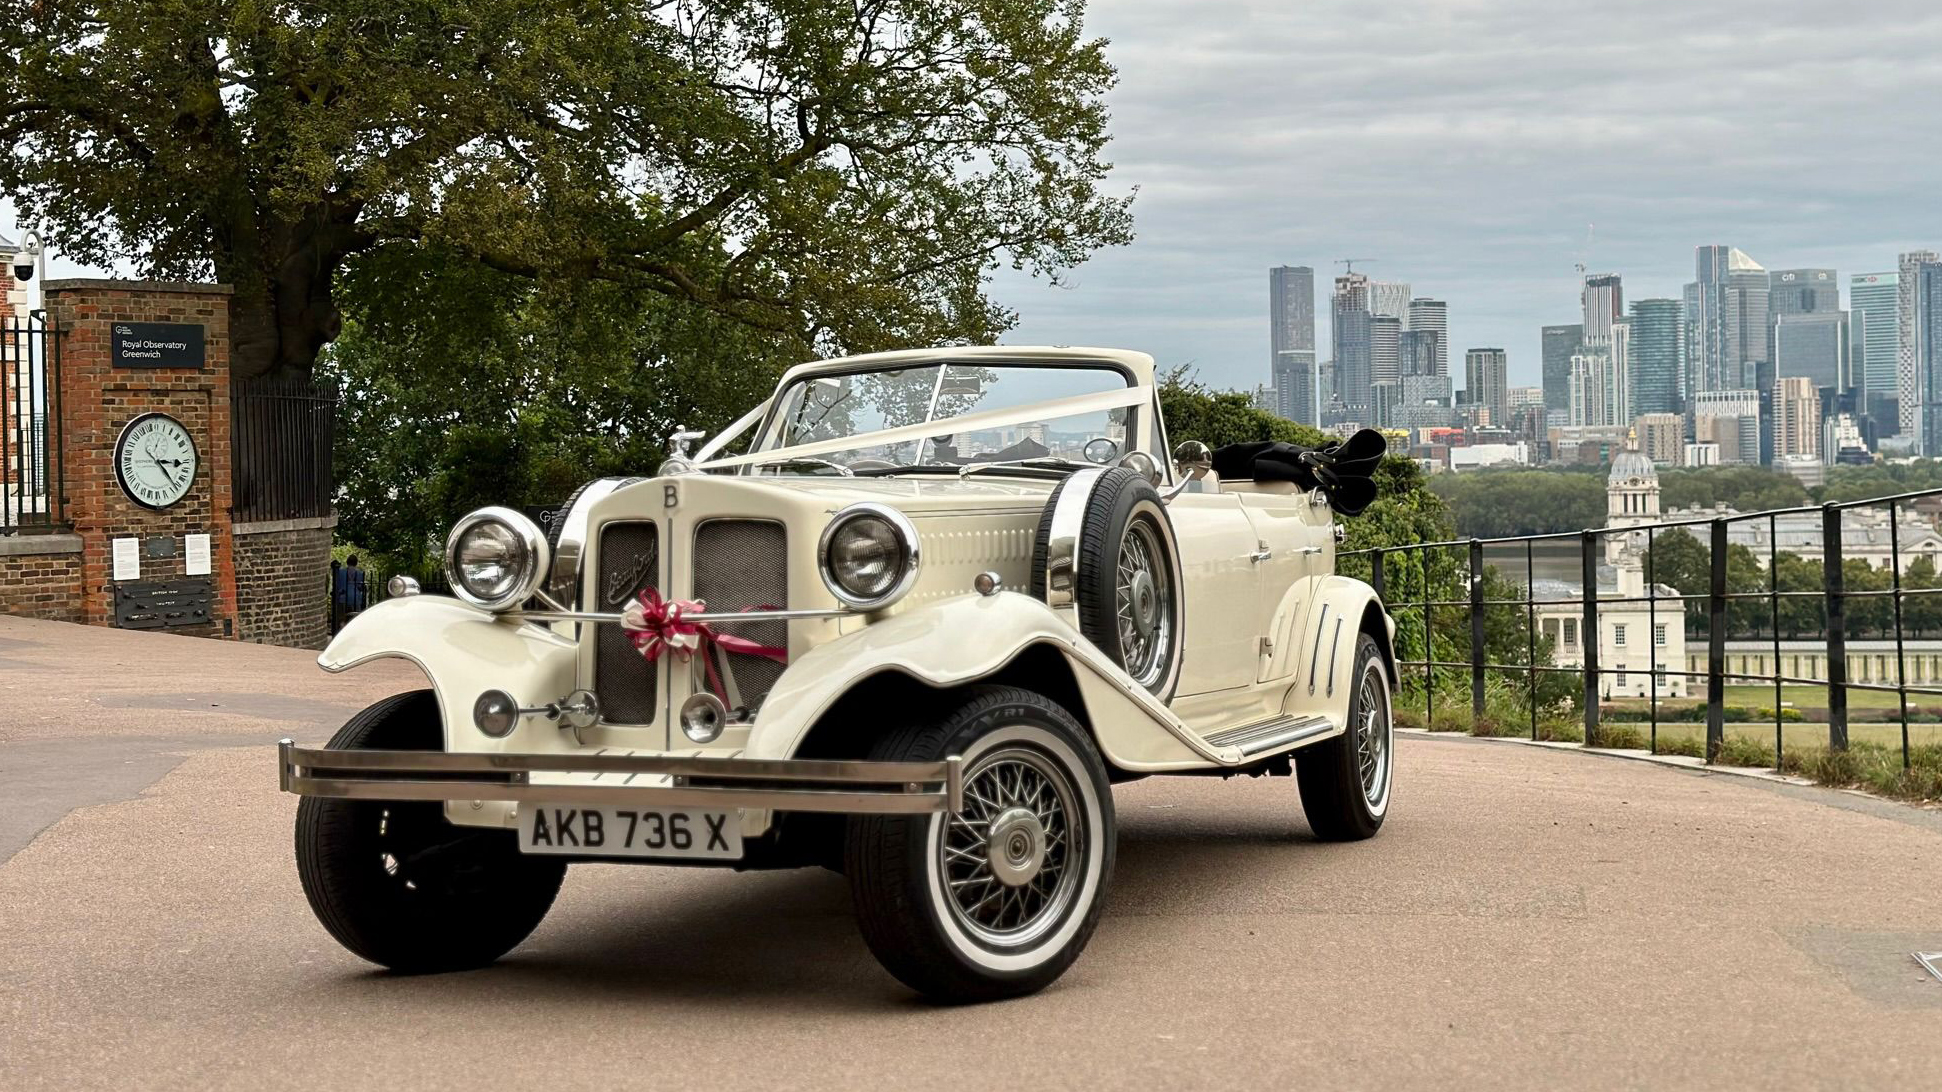 Ivory vintage Beauford convertible with roof down decorated withivory ribbon and a burgundy bow at a local Bexleyheath wedding with view of the city of London in the background.